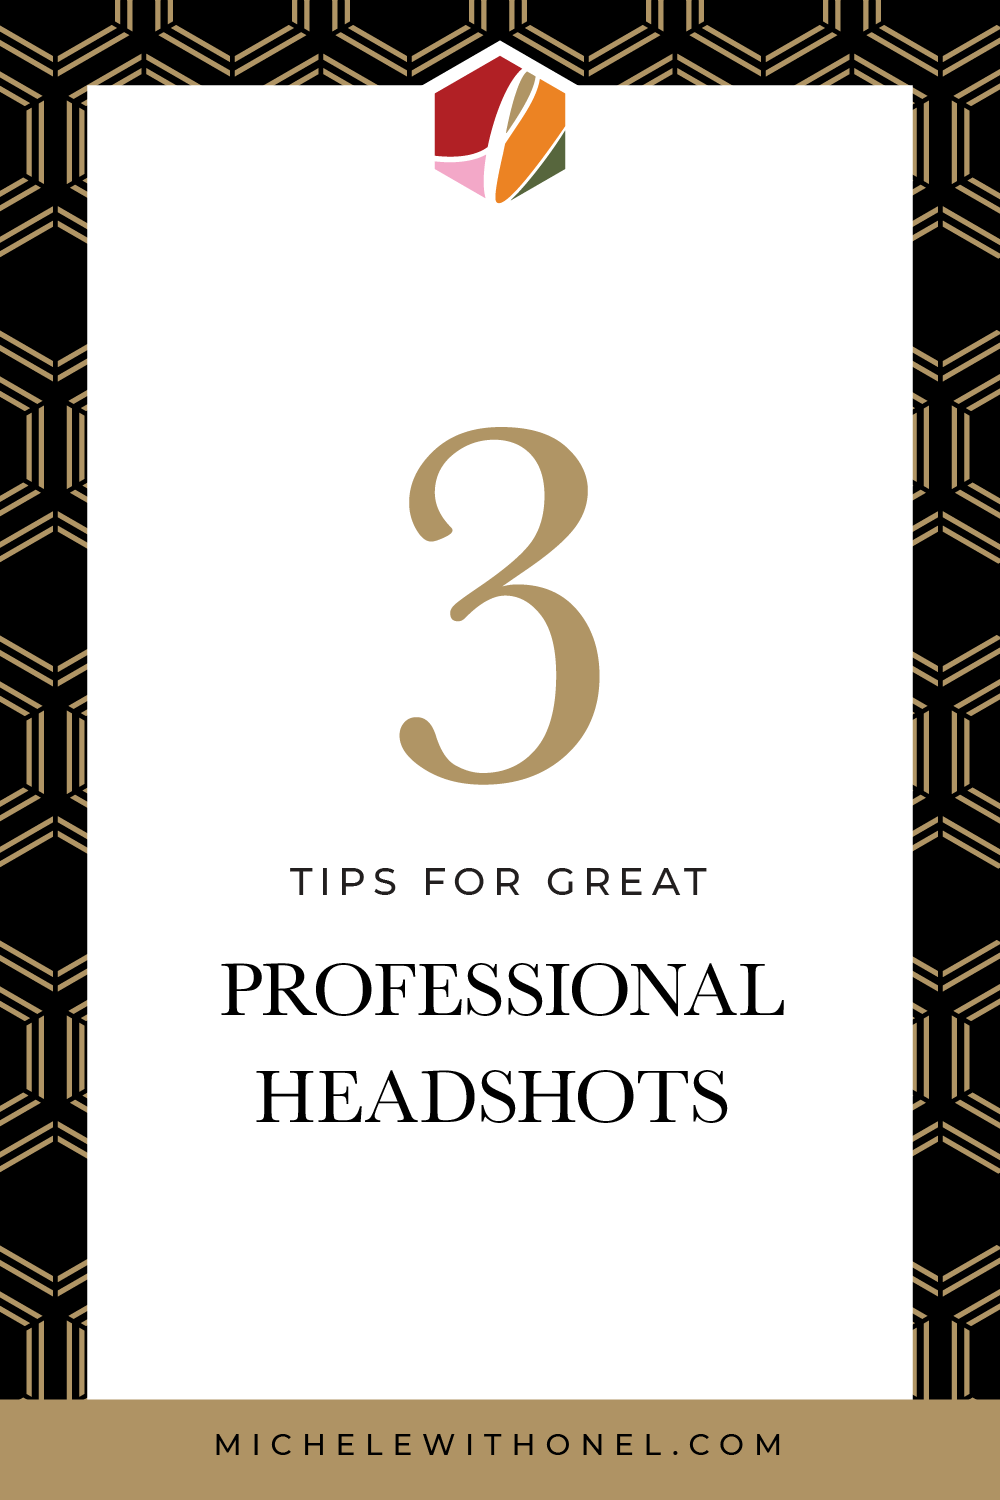 Interested in learning some headshot tips for photographers? This post is for you! Learn how to take great professional headshots of anyone—including how to pose, light, choose the right lens, and how branding photography can help other aspects of your business. #branding #photography #headshots #business